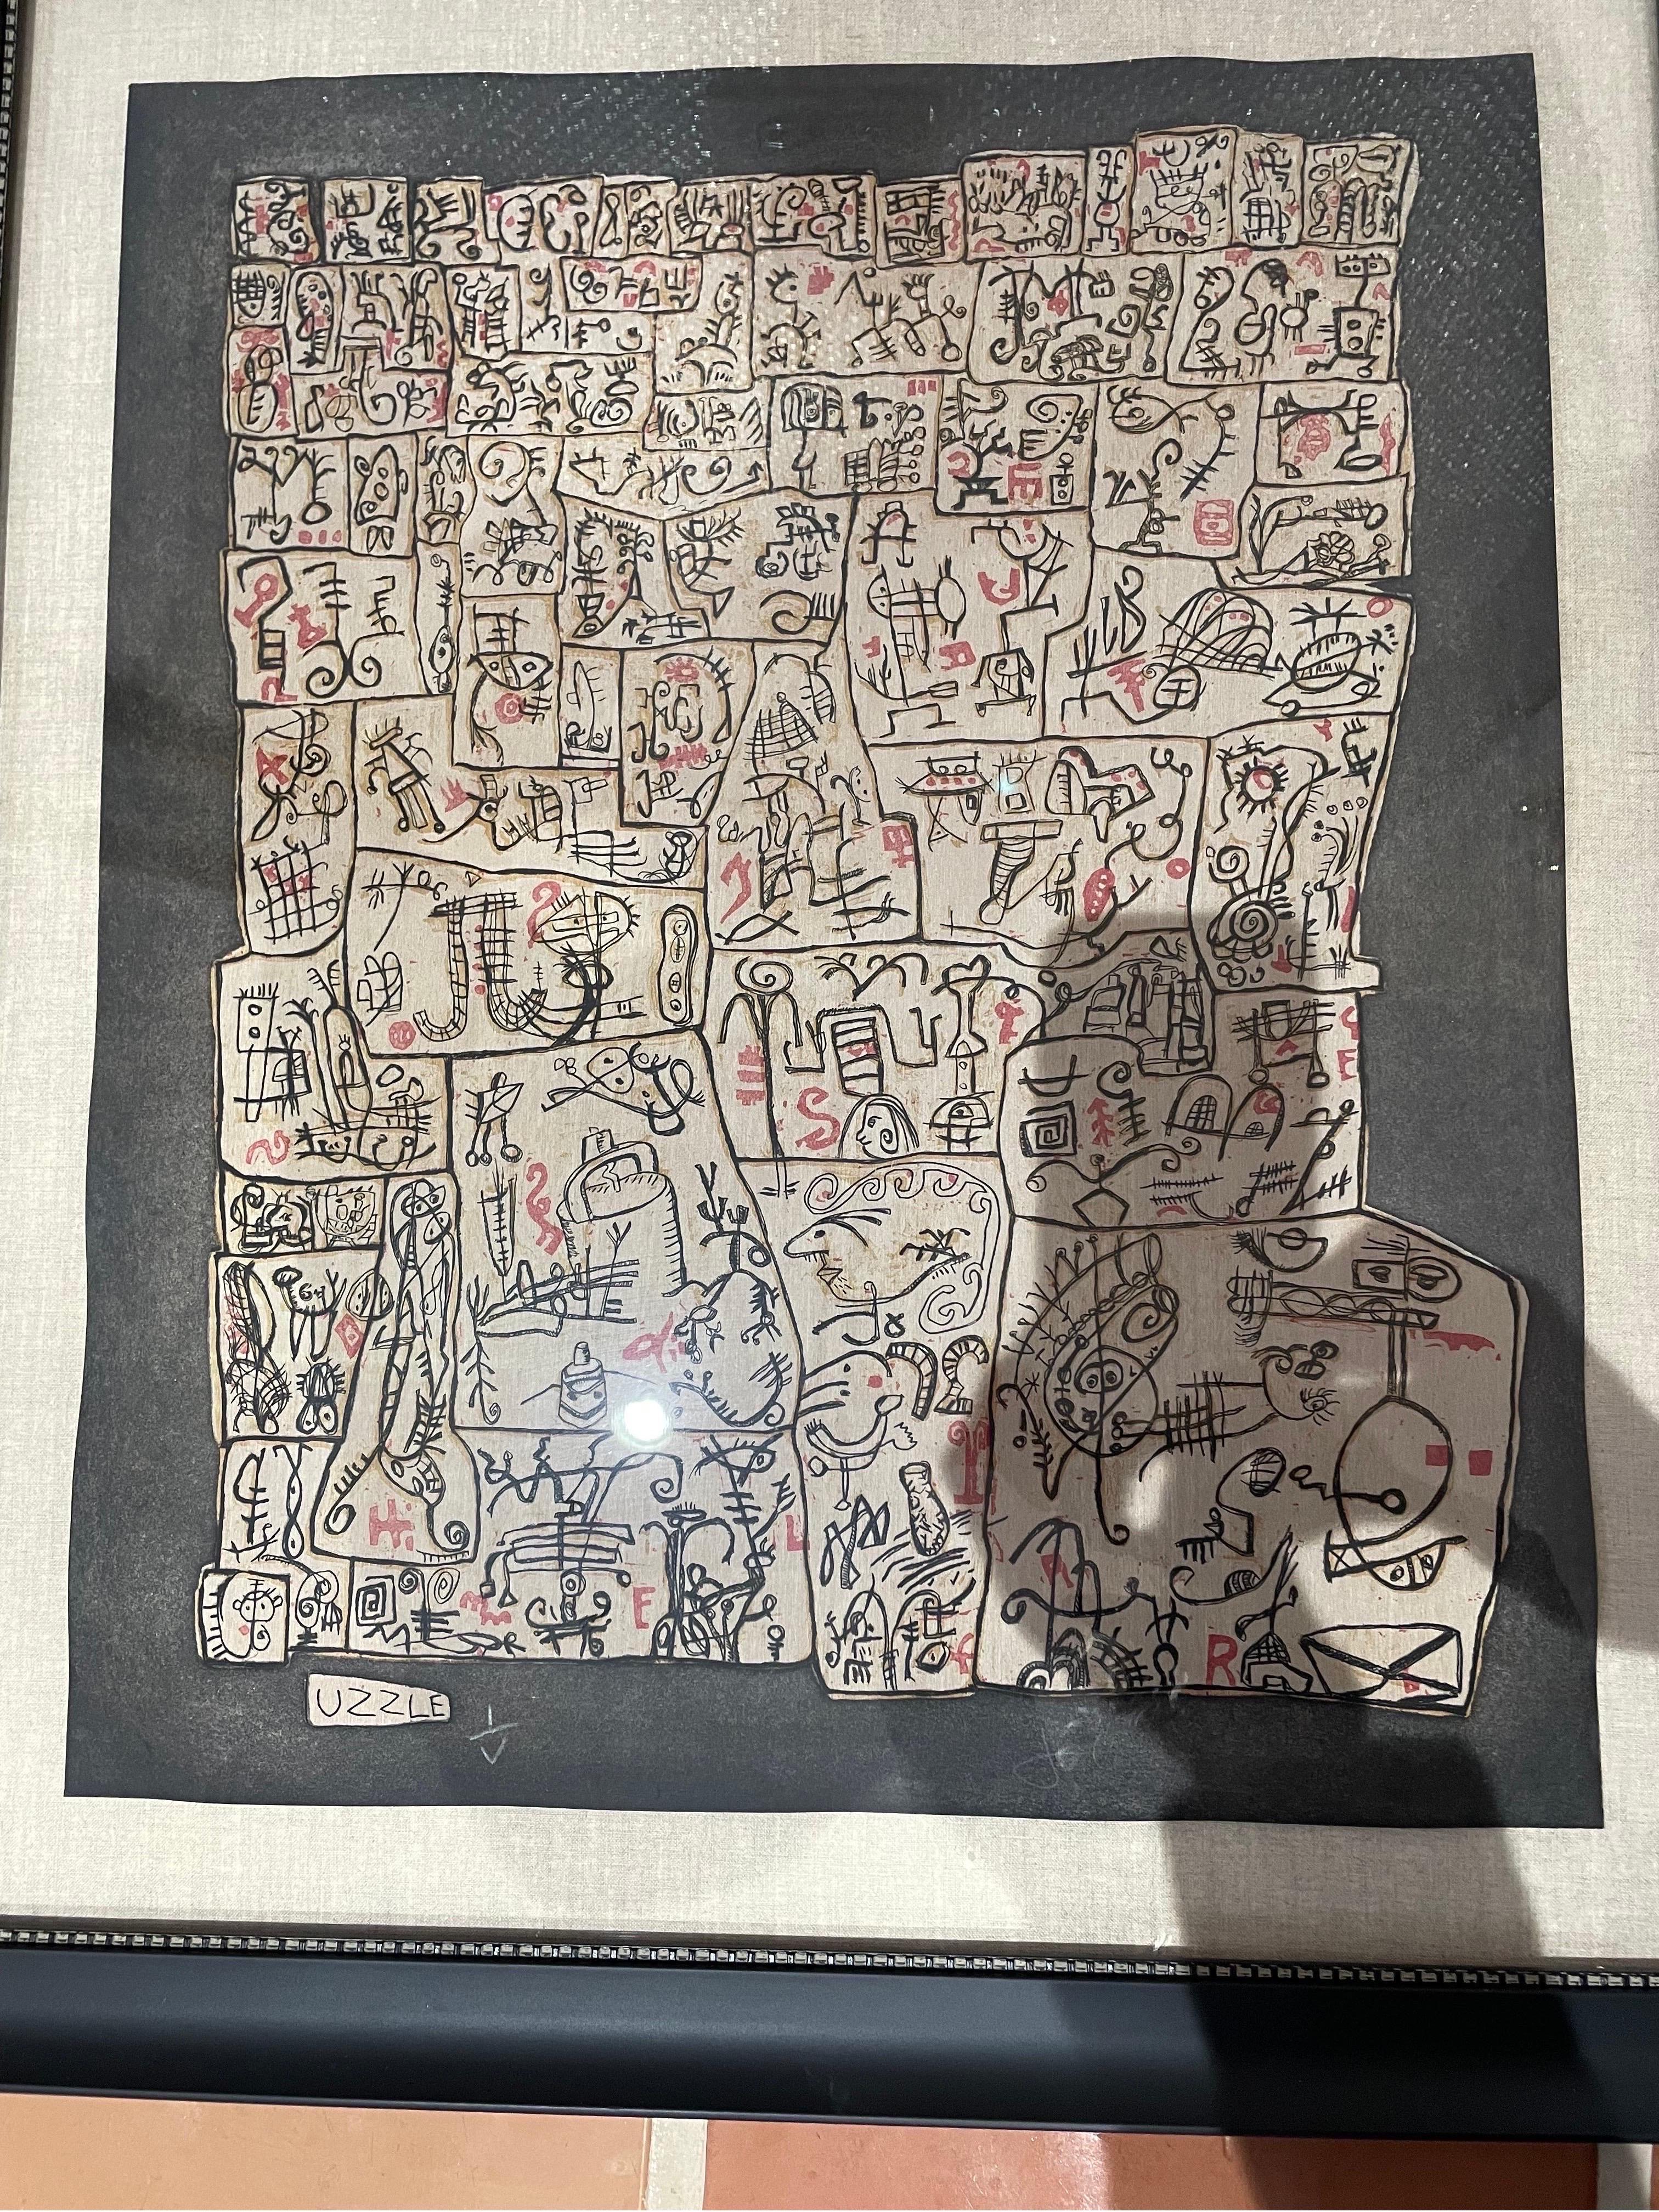 This is a wonderful original 1 of 5 block prints of Chicago artist John Himmelfarb depicting his many small characters in his unique style 
This was done 2001